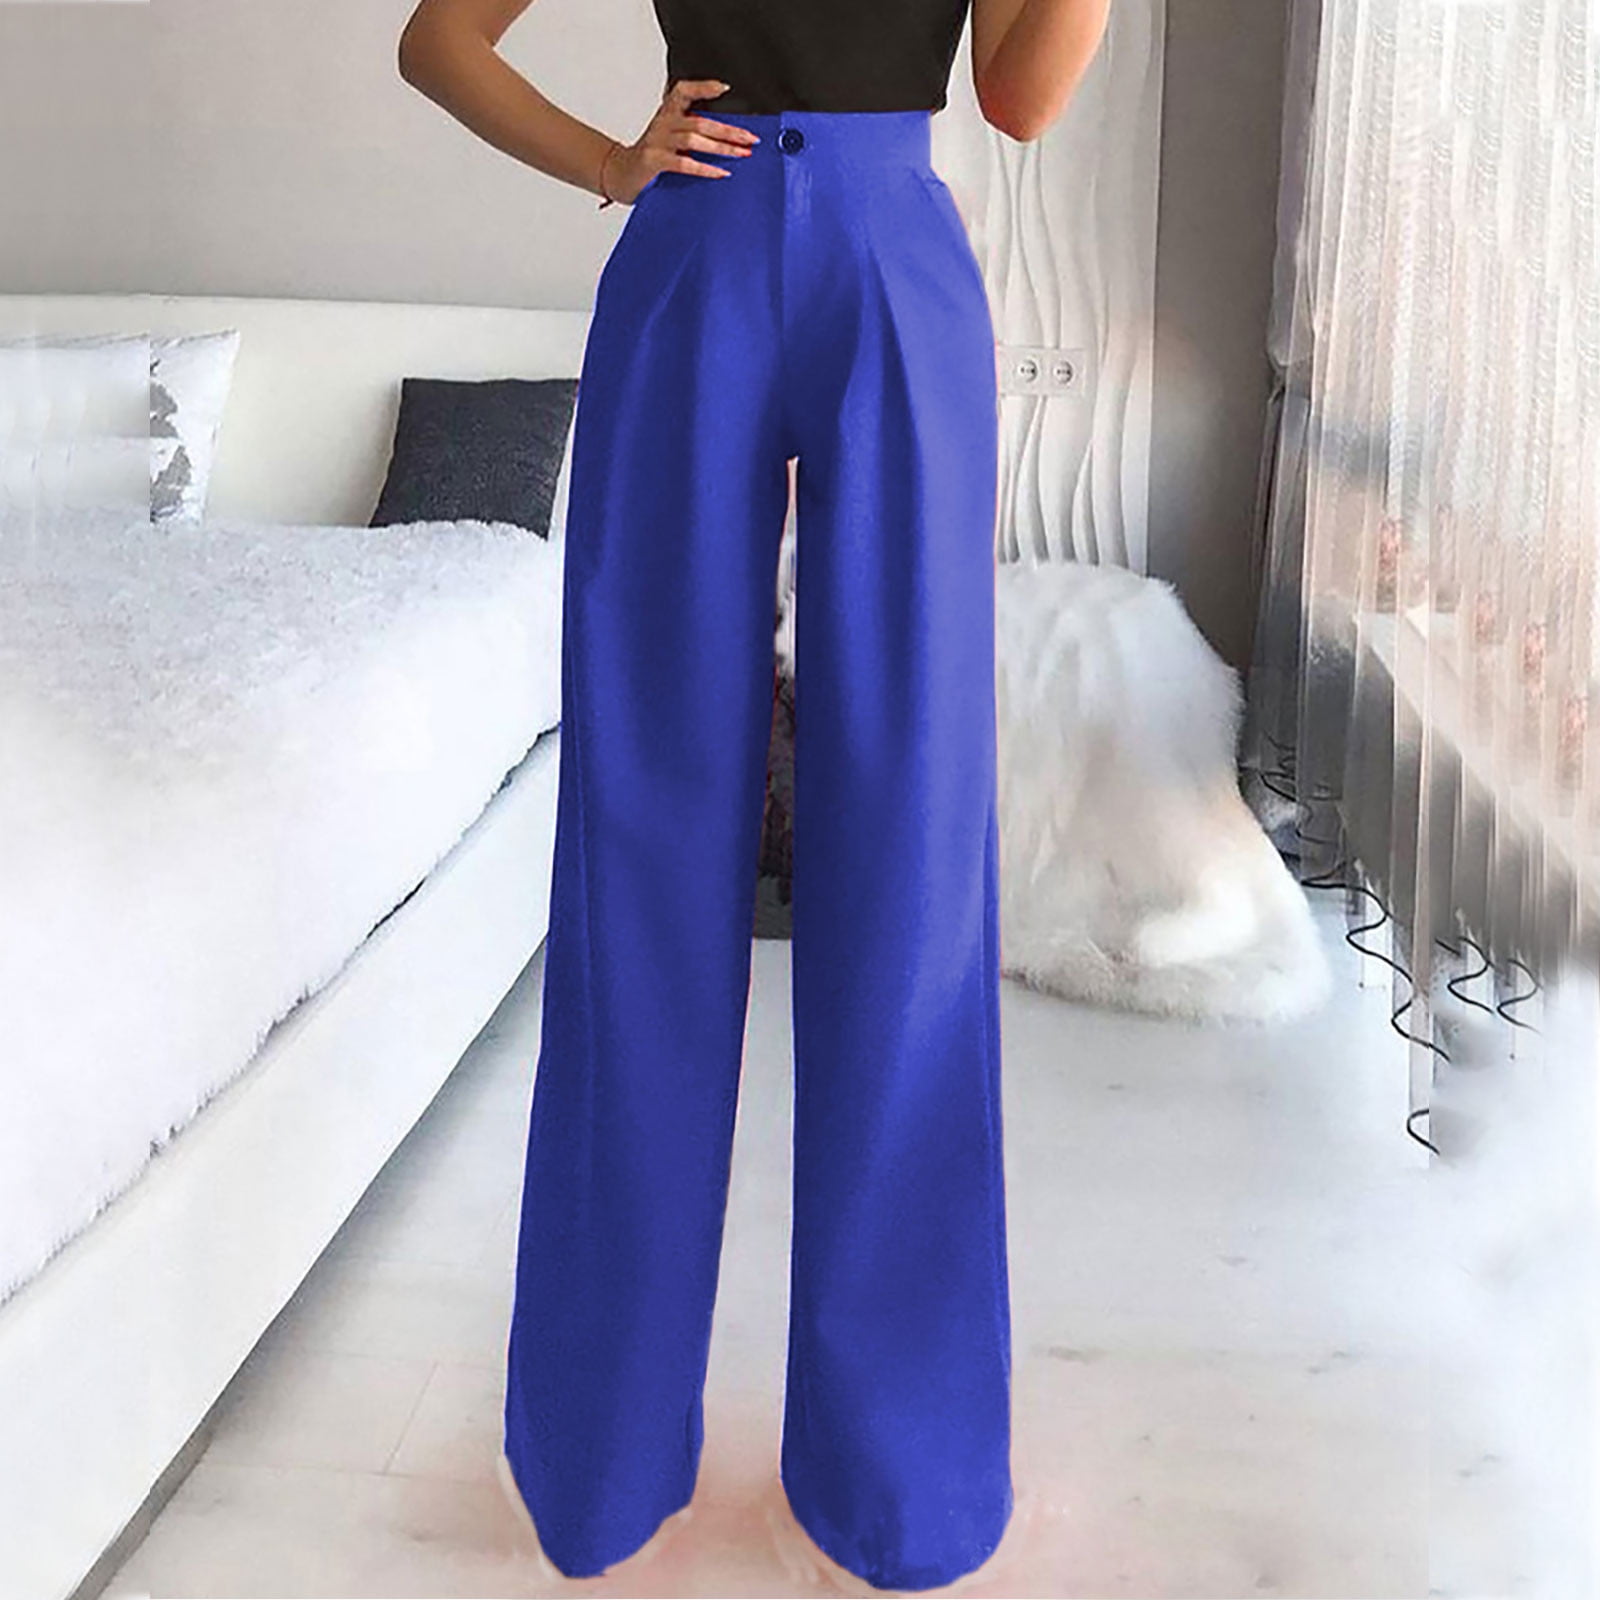 High Waisted Pants for Women Dress Pant Straight Wide Leg Flowy Pants Solid  Casual Workout Trousers Cotton Loungewear Pants Palazzo Lounge Pants